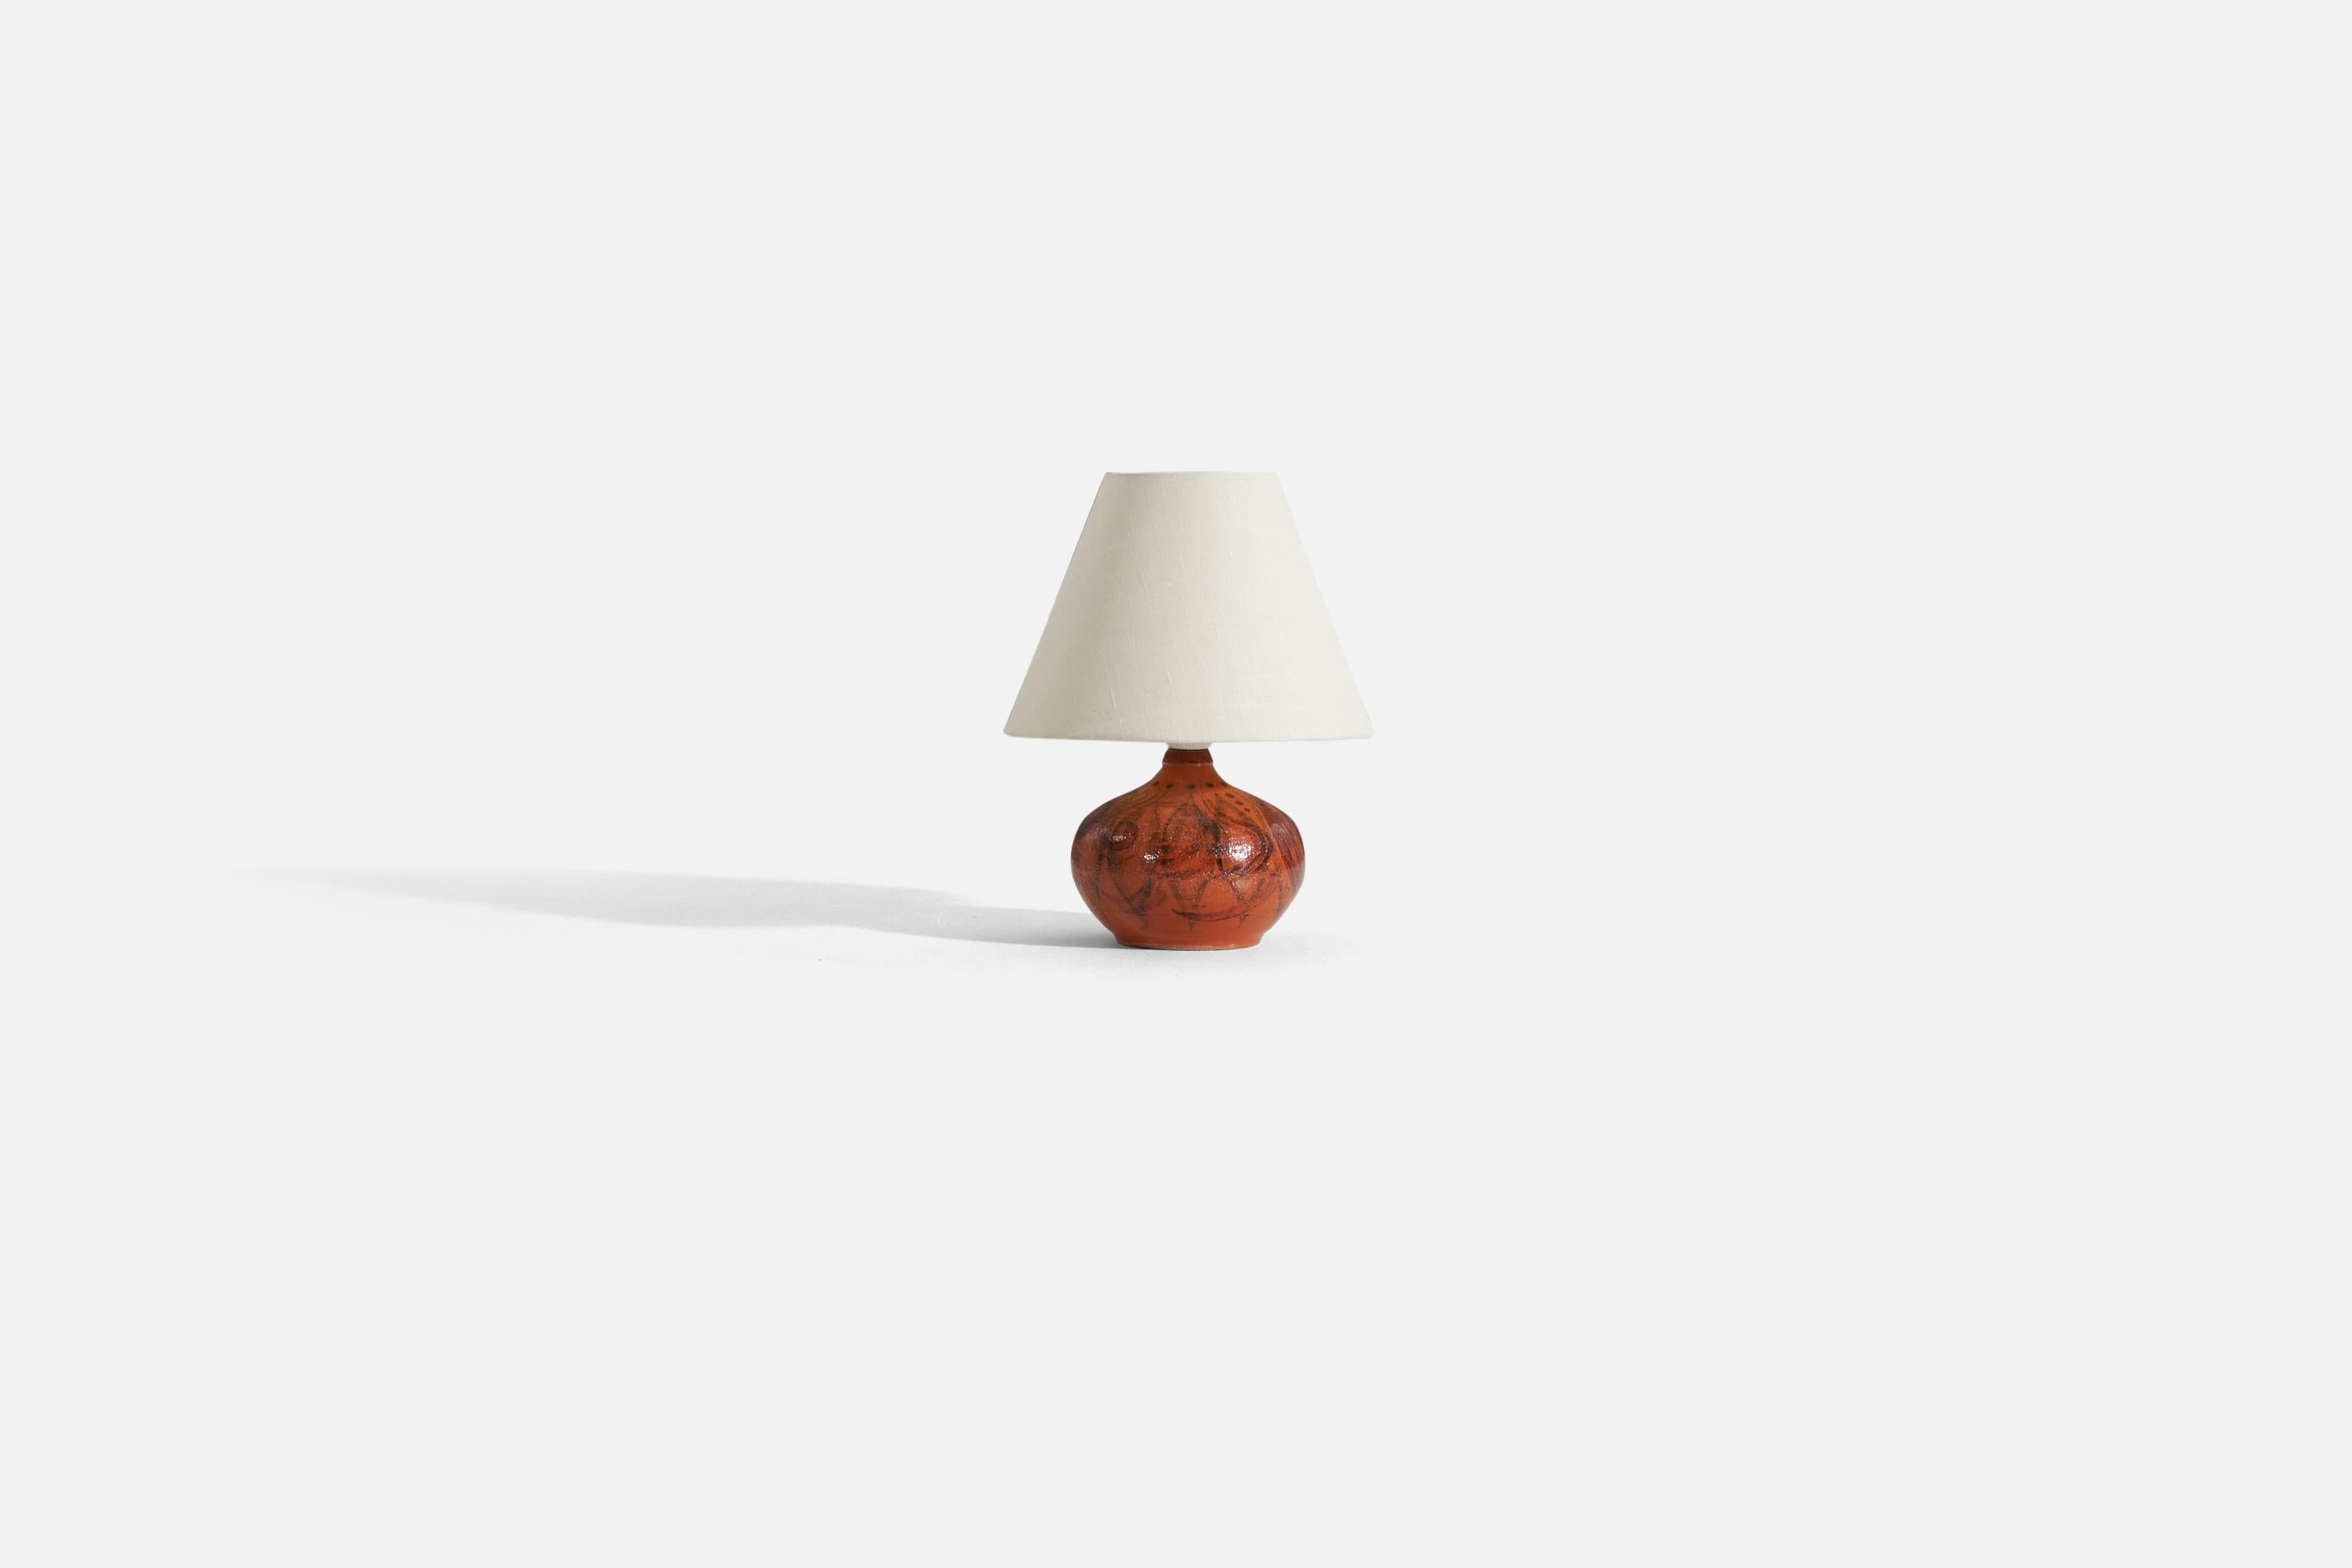 A red-orange glazed stoneware table lamp, designed and produced in Sweden, 1960s.

Measurements listed are of the lamp itself. Sold without lampshade.
For reference:
Measurements of shade (inches): 3.75 x 8.25 x 6.25 (T x B x S)
Measurements